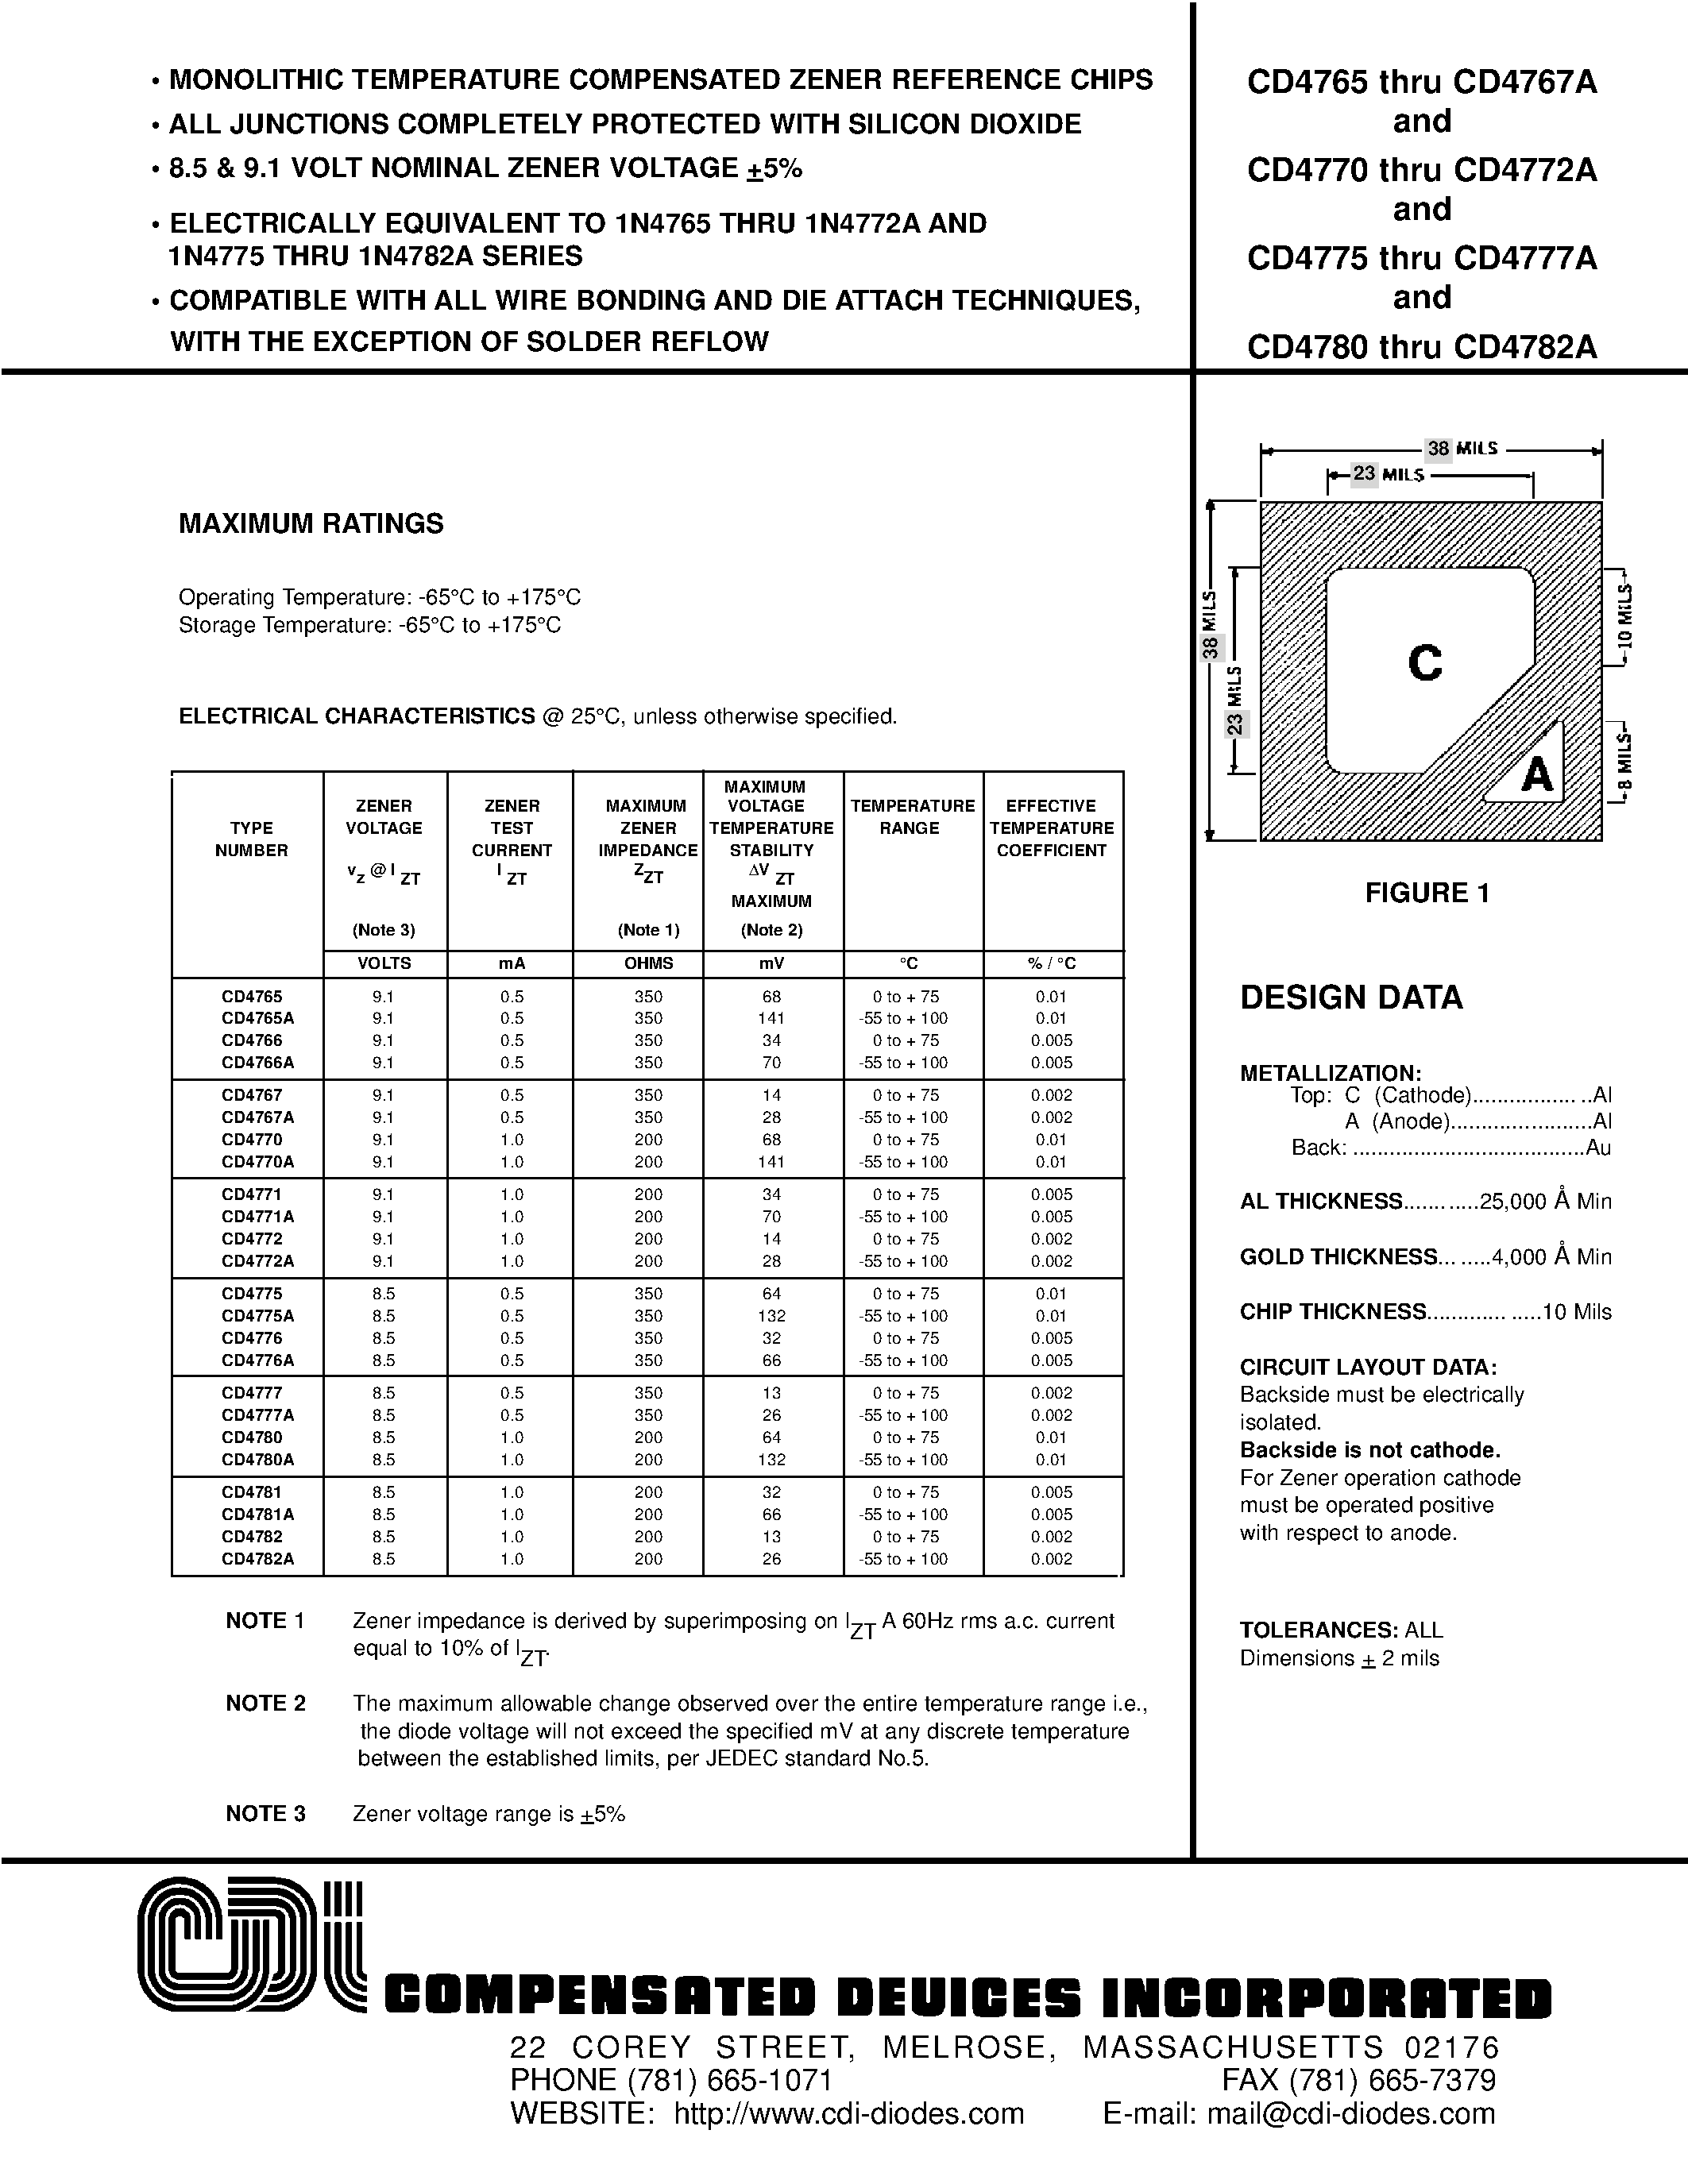 Datasheet CD4772A - MONOLITHIC TEMPERATURE COMPENSATED ZENER REFERENCE CHIPS page 1